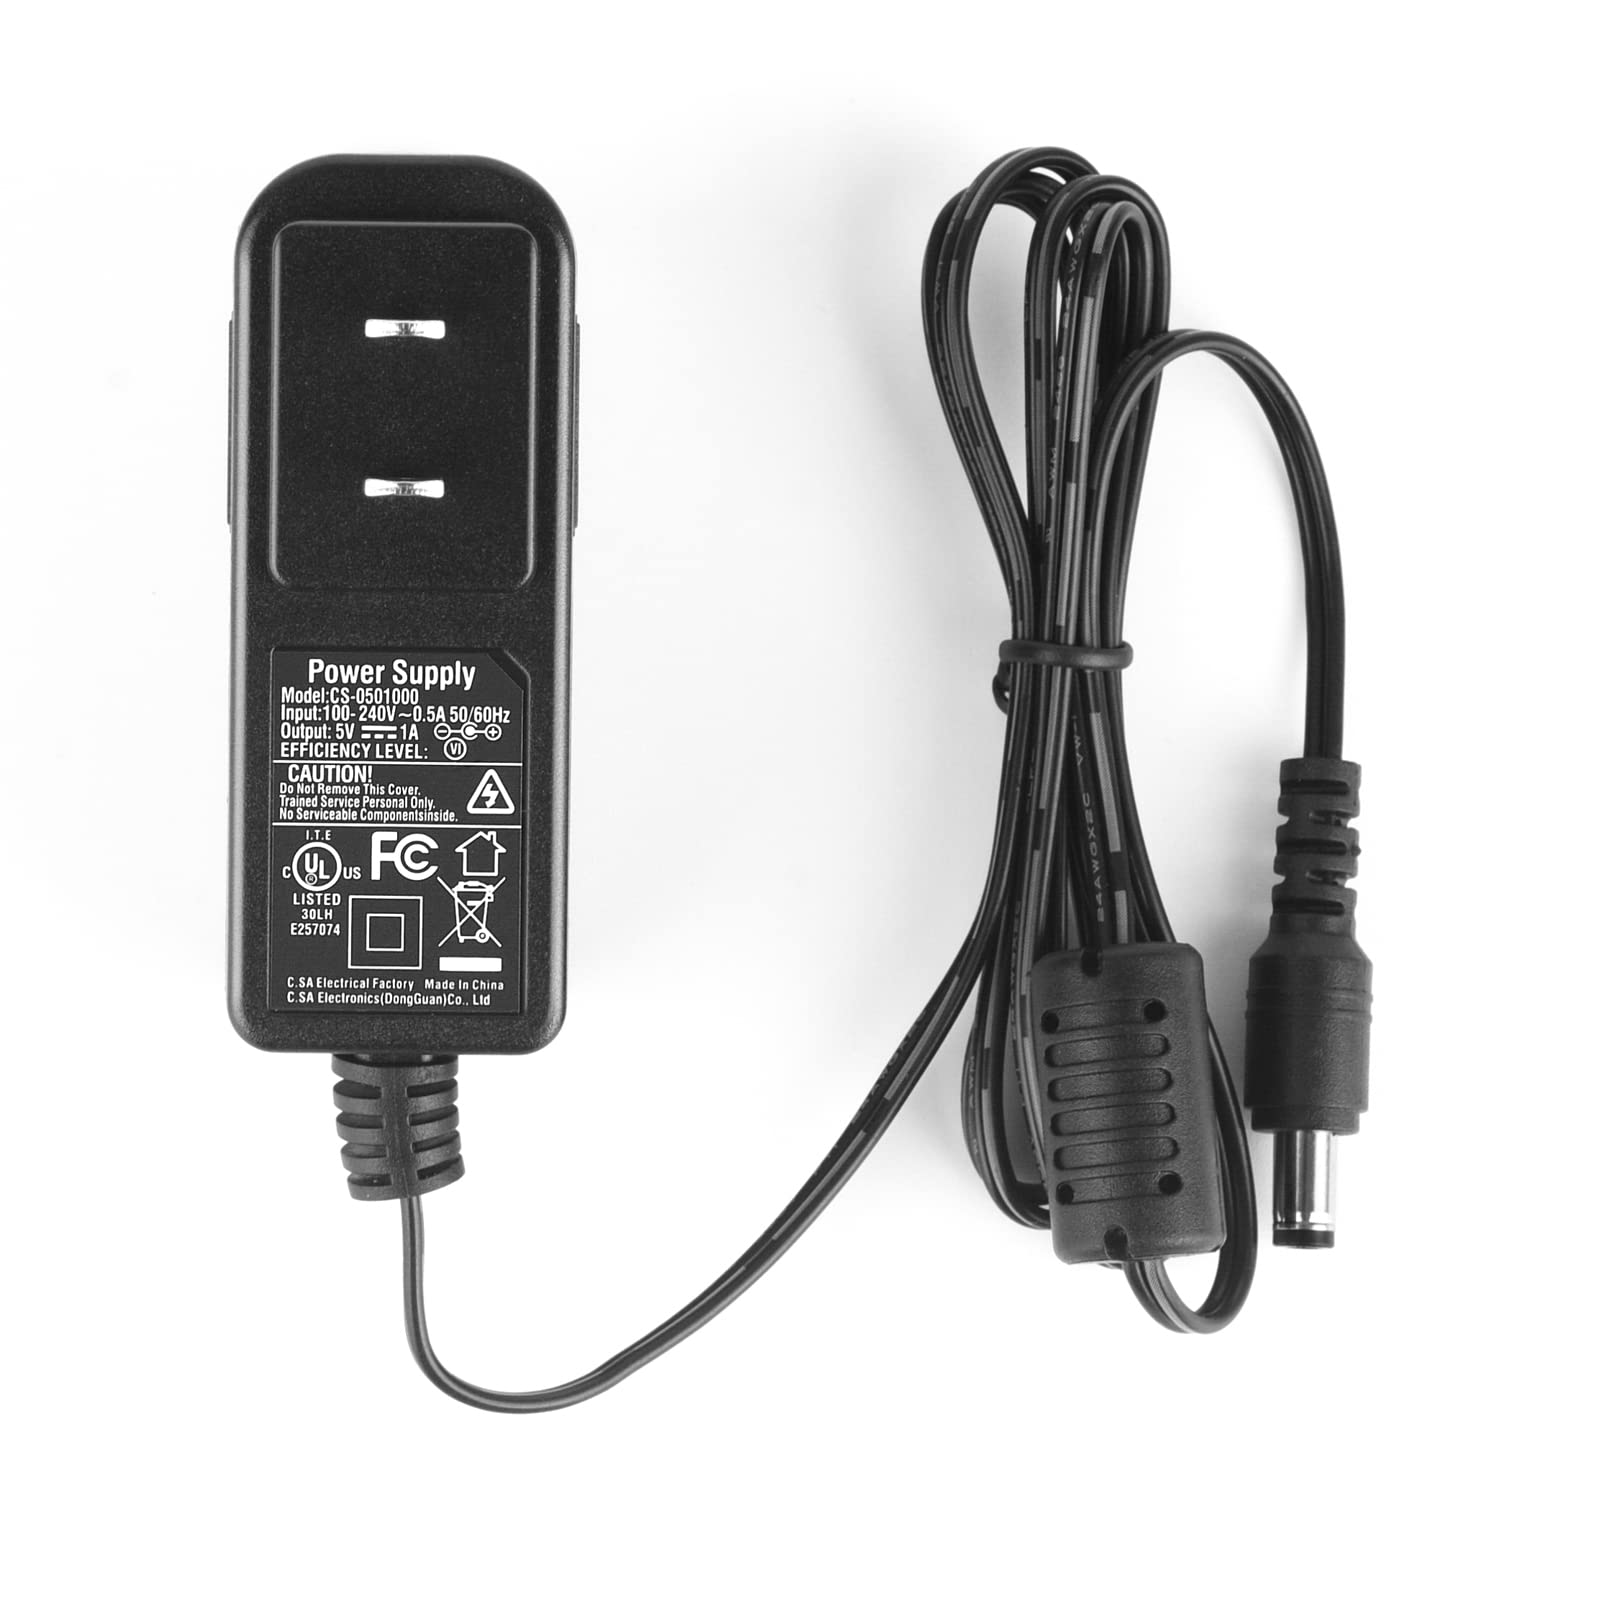 ADAP-5V1A 5V DC Power Adapter for Fanvil Phones or others